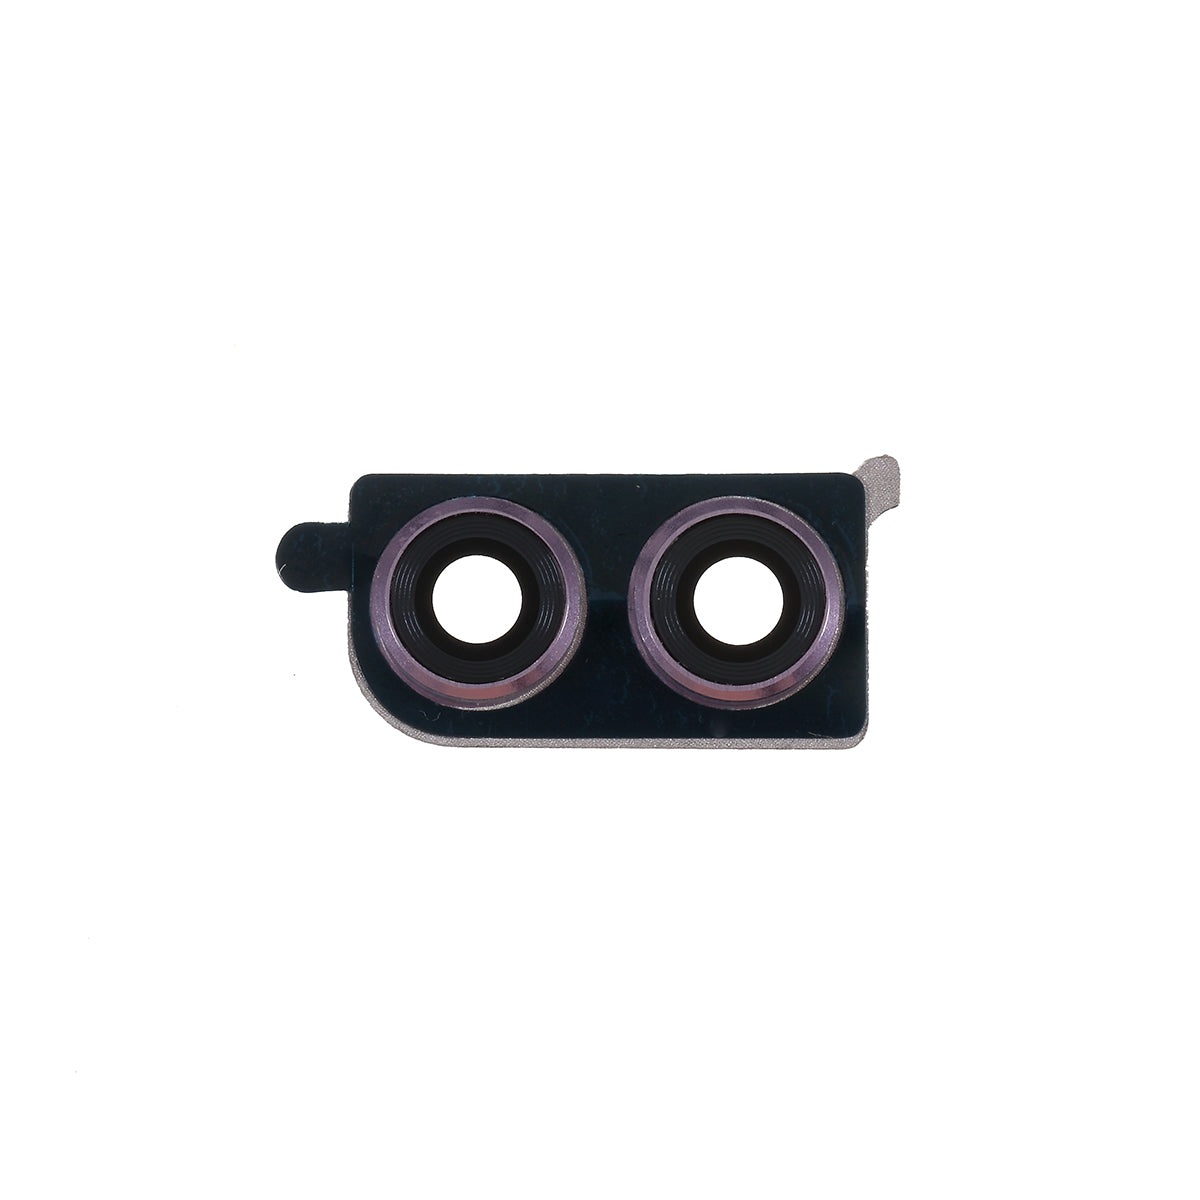 OEM Back Camera Lens Ring Cover with Glass Lens for Huawei Honor 8X/Honor View 10 Lite - Purple